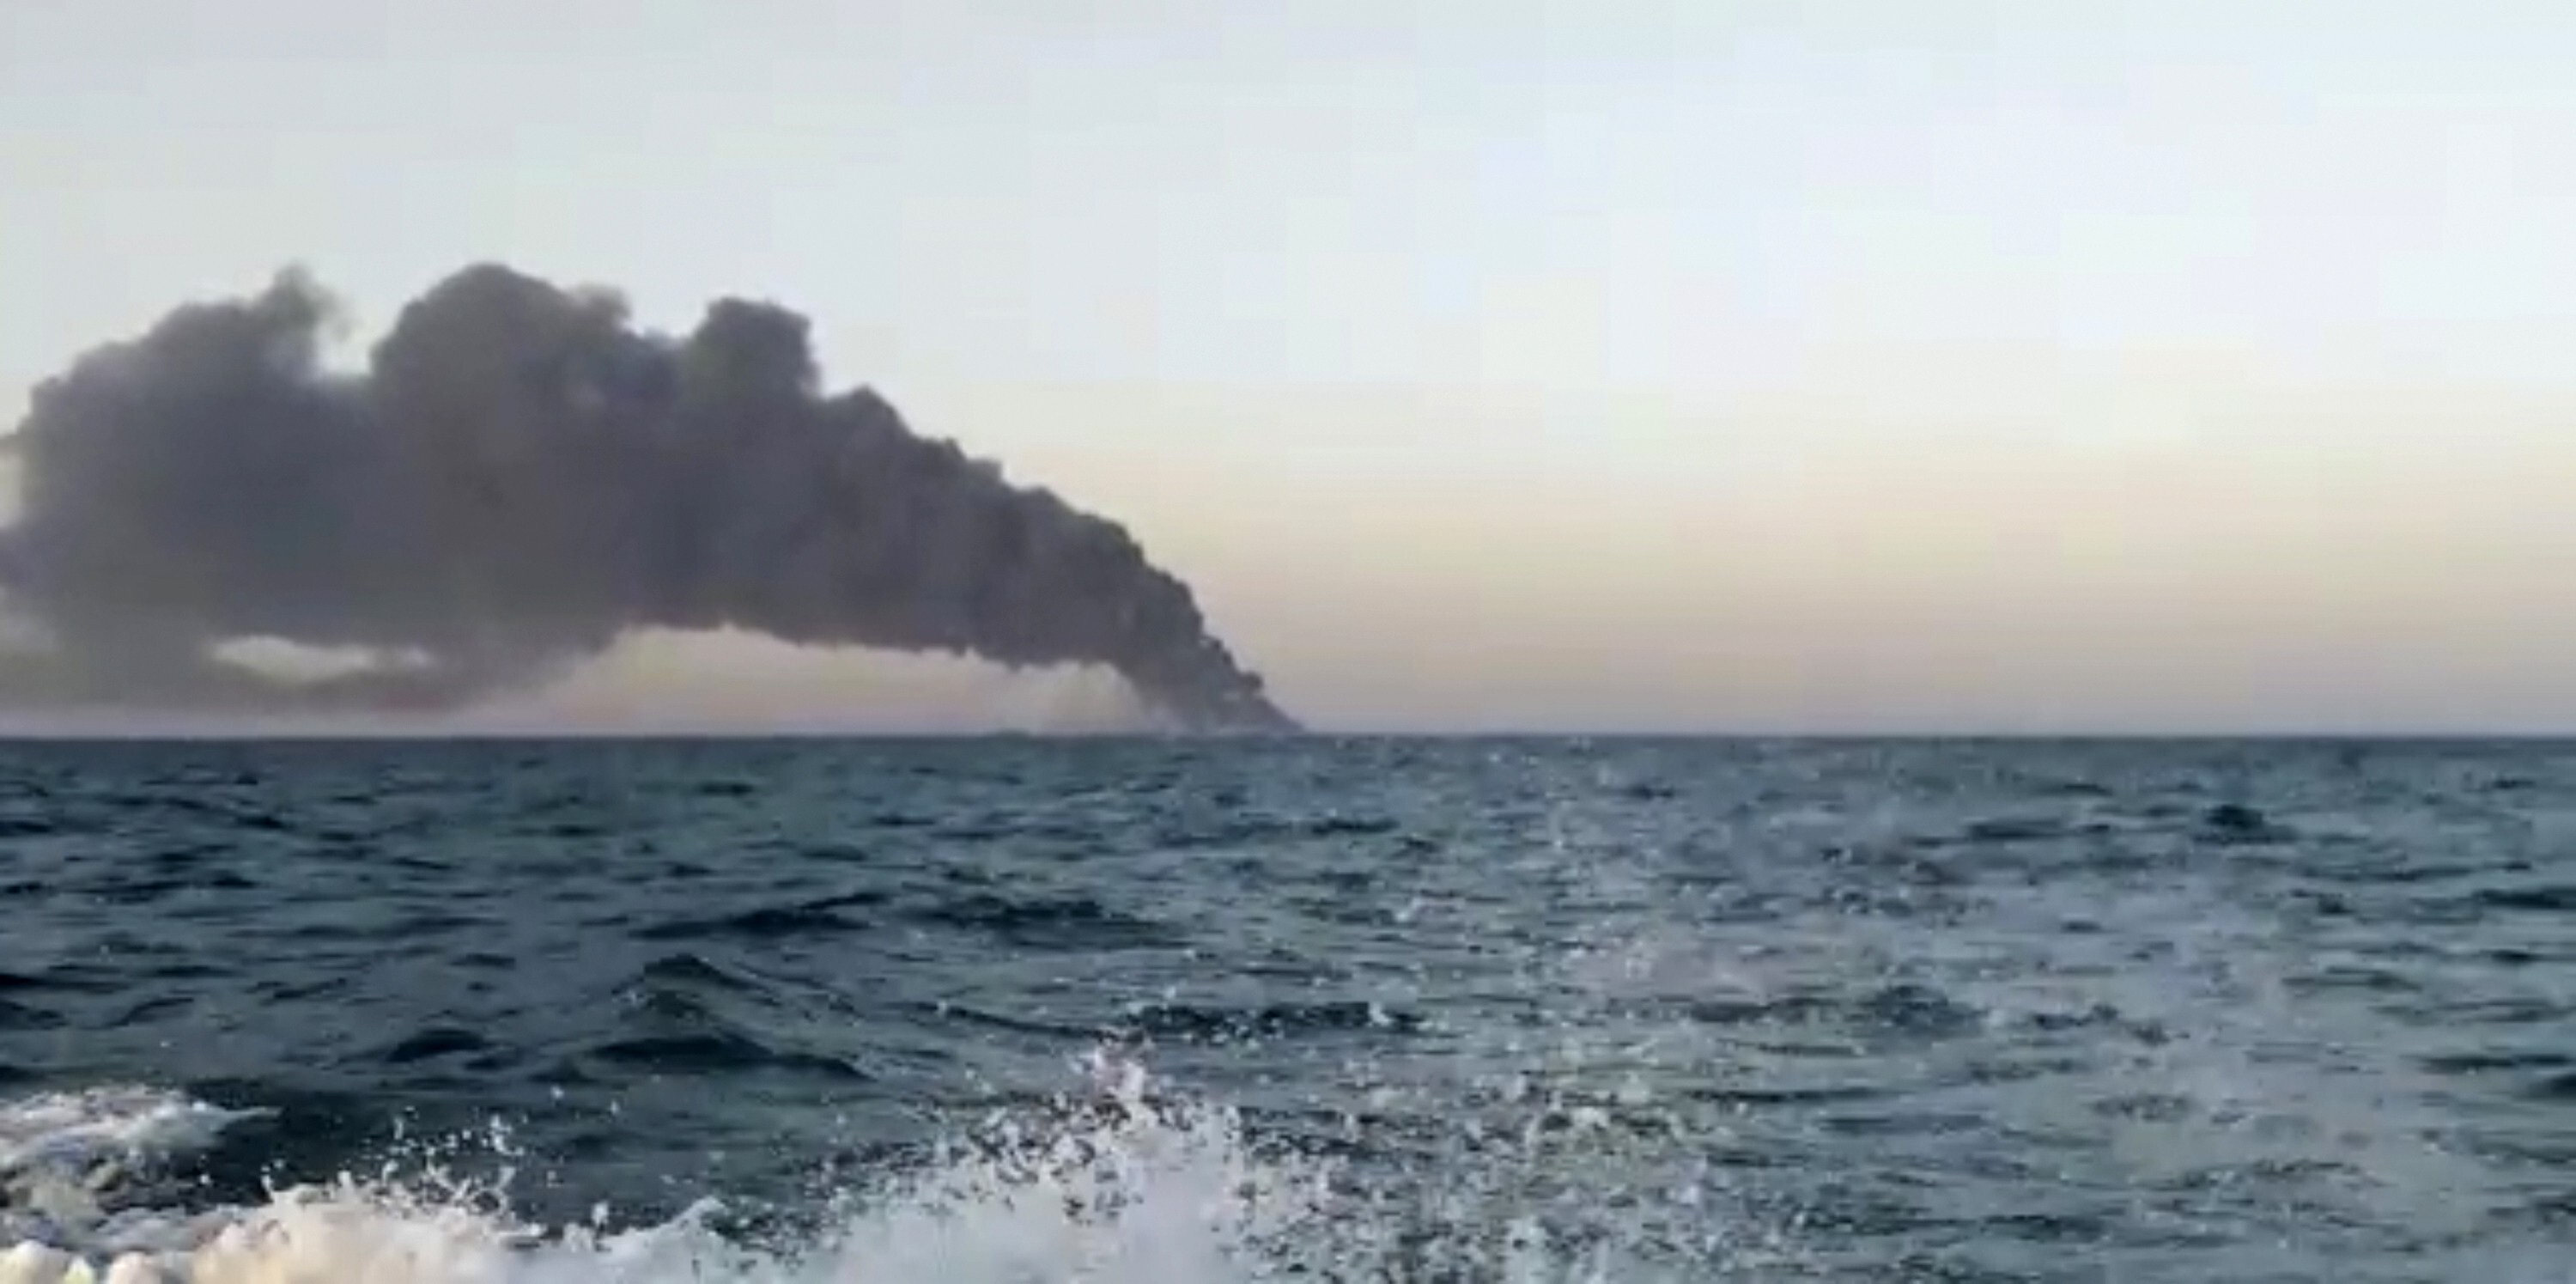 Smoke rises from Iran's navy support ship Kharg in the Gulf of Oman. Photo: AP